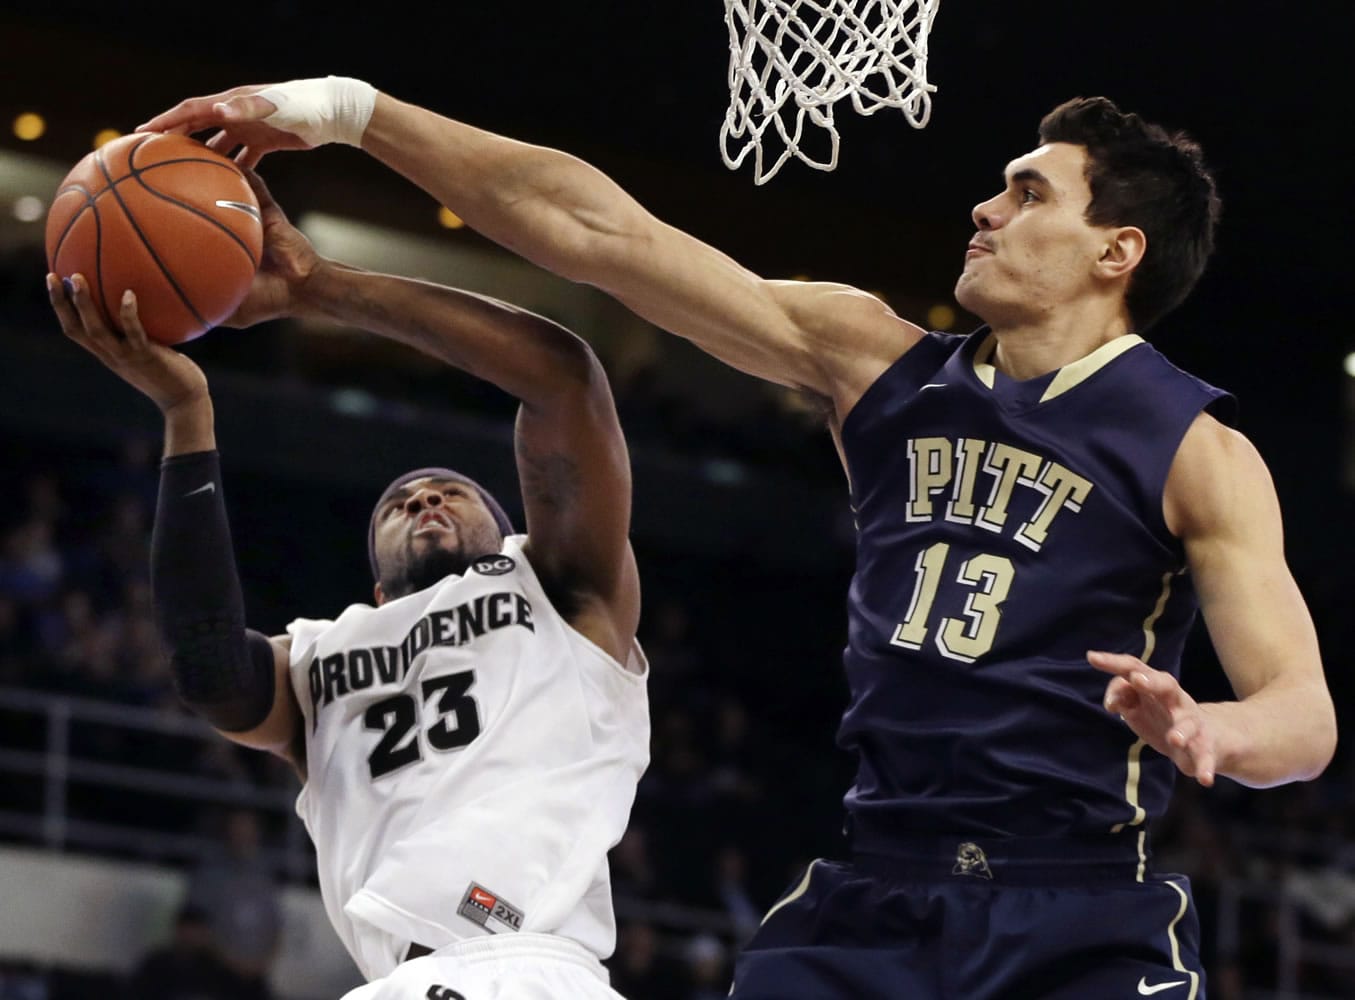 Pittsburgh center Steven Adams (13), blocking a shot by Providence forward LaDontae Henton (23), is a possible first round pick in the NBA Draft on Thursday.